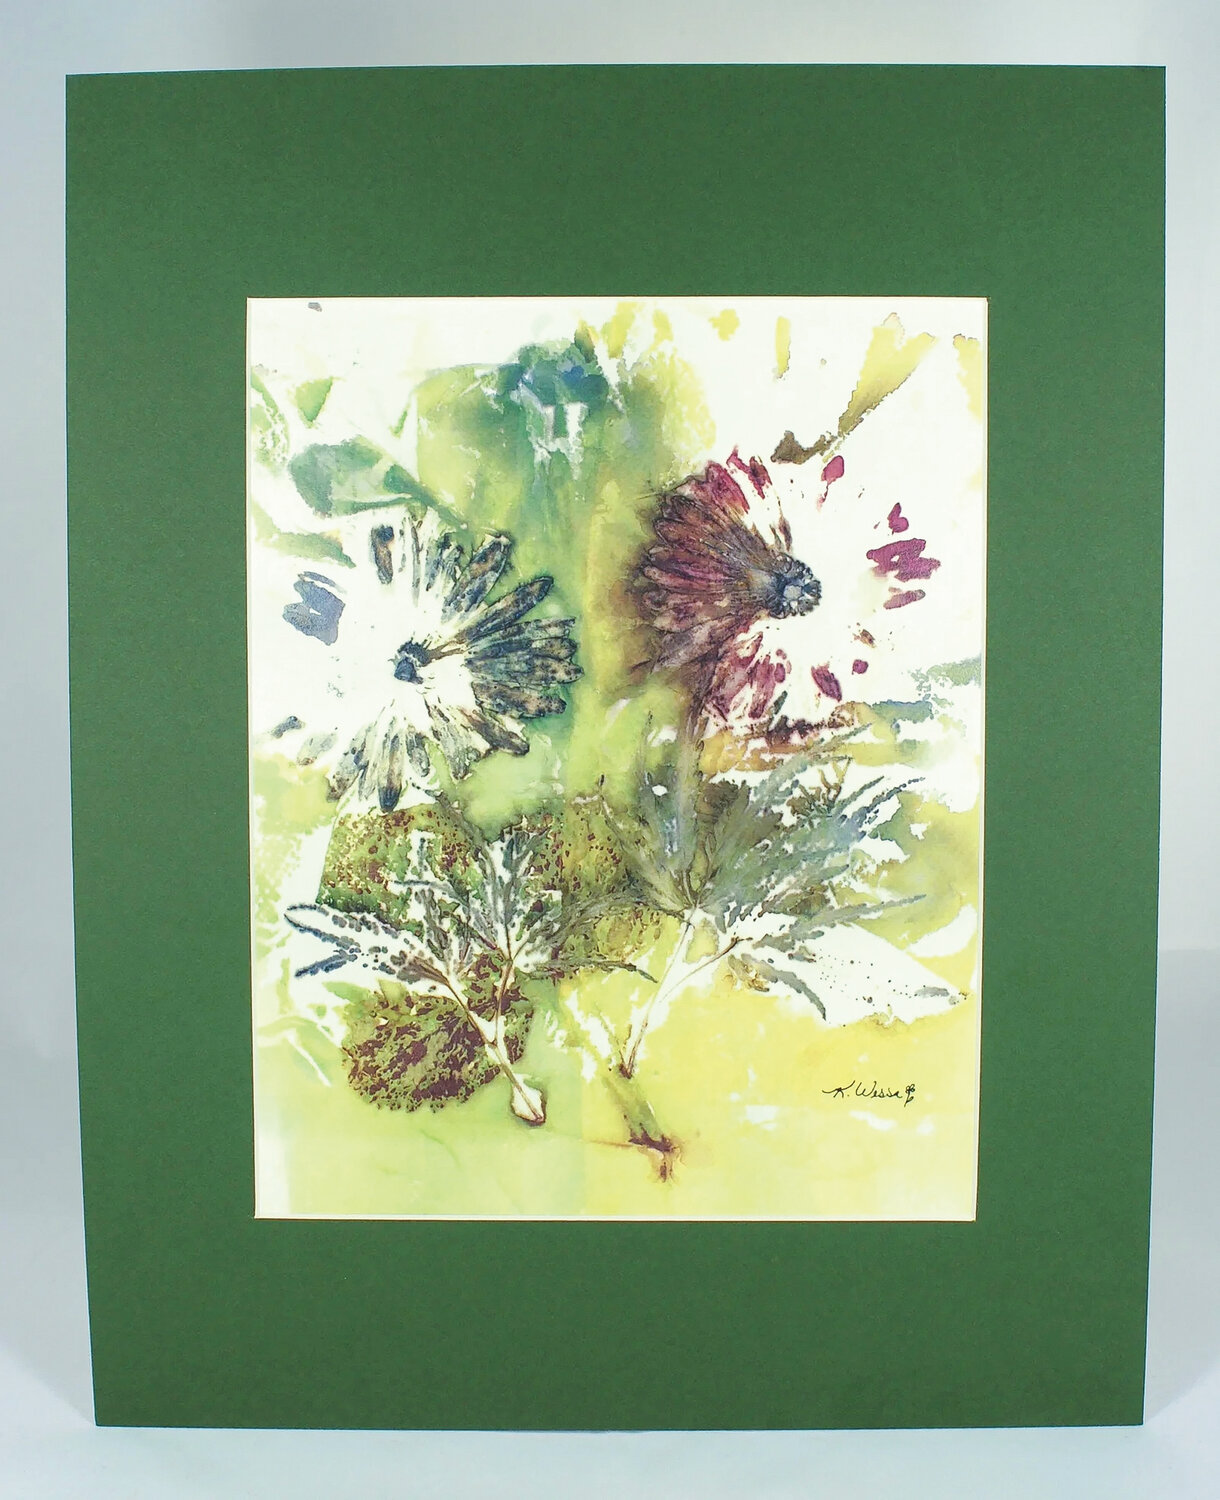 “Dancing Daylight” is an eco print artwork by Kim Wessa featuring two dahlia blooms and red maple with alum mordant.